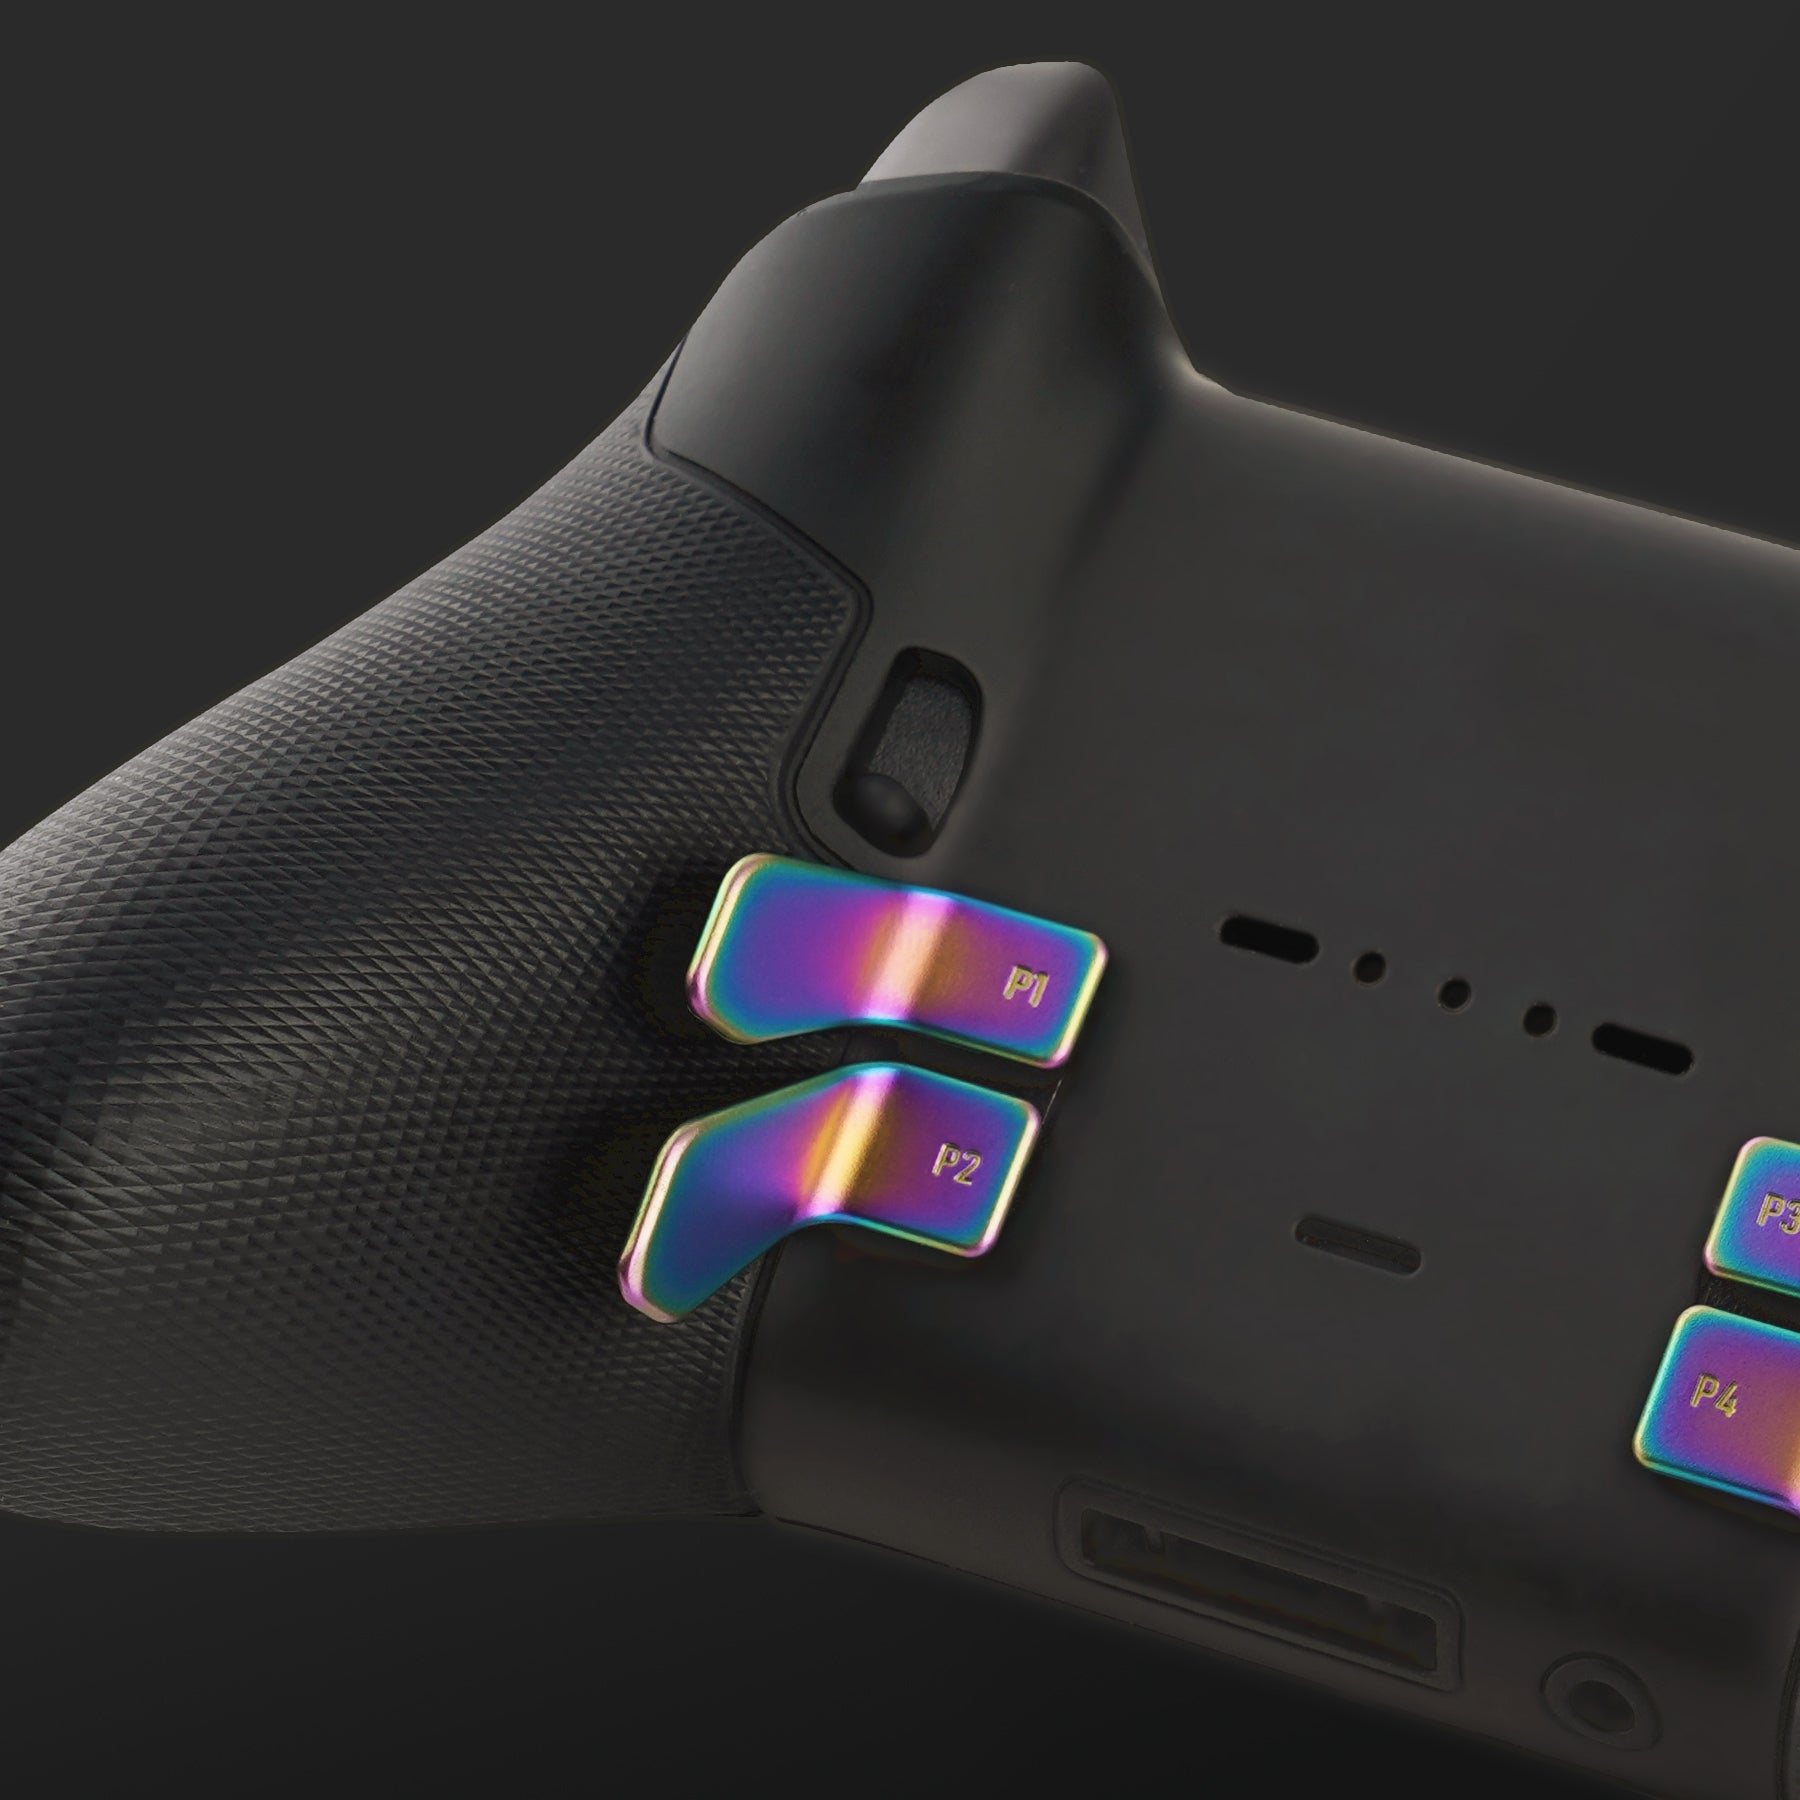 eXtremeRate Elite Controller Paddles, Interchangeable Paddles for